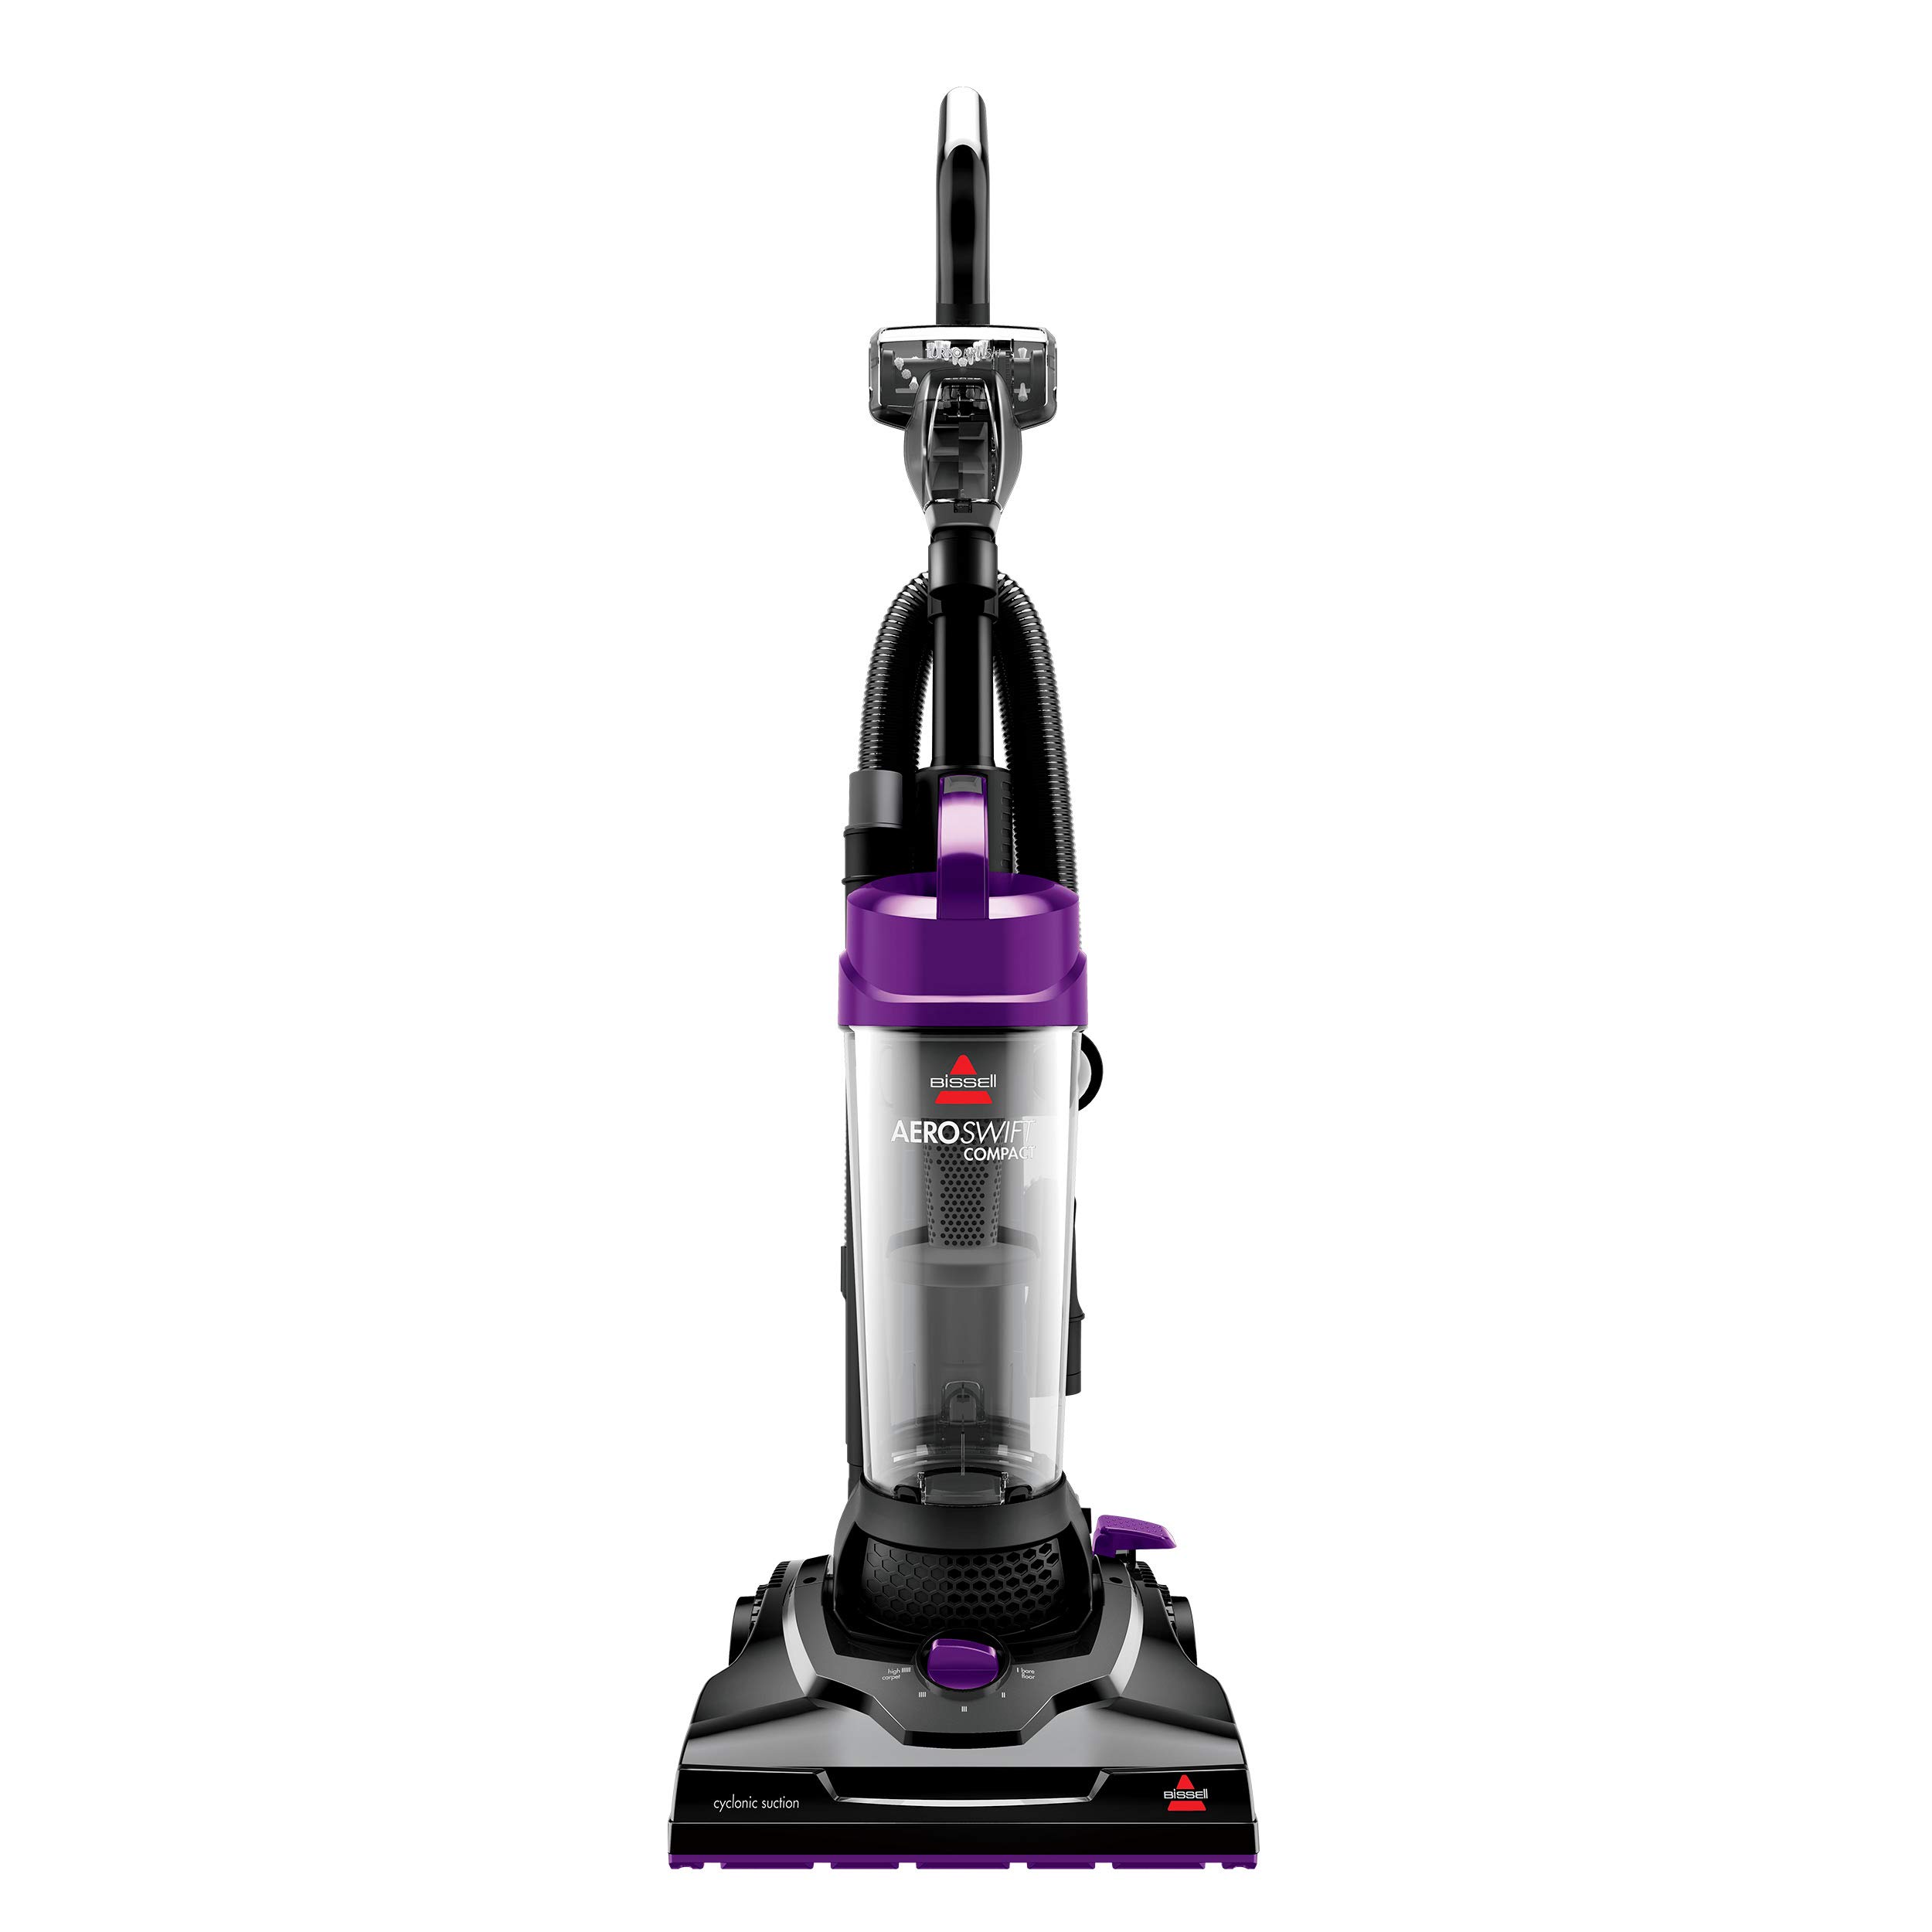 BISSELL Aeroswift Compact Vacuum Cleaner, 2612A,Purple - image 1 of 6